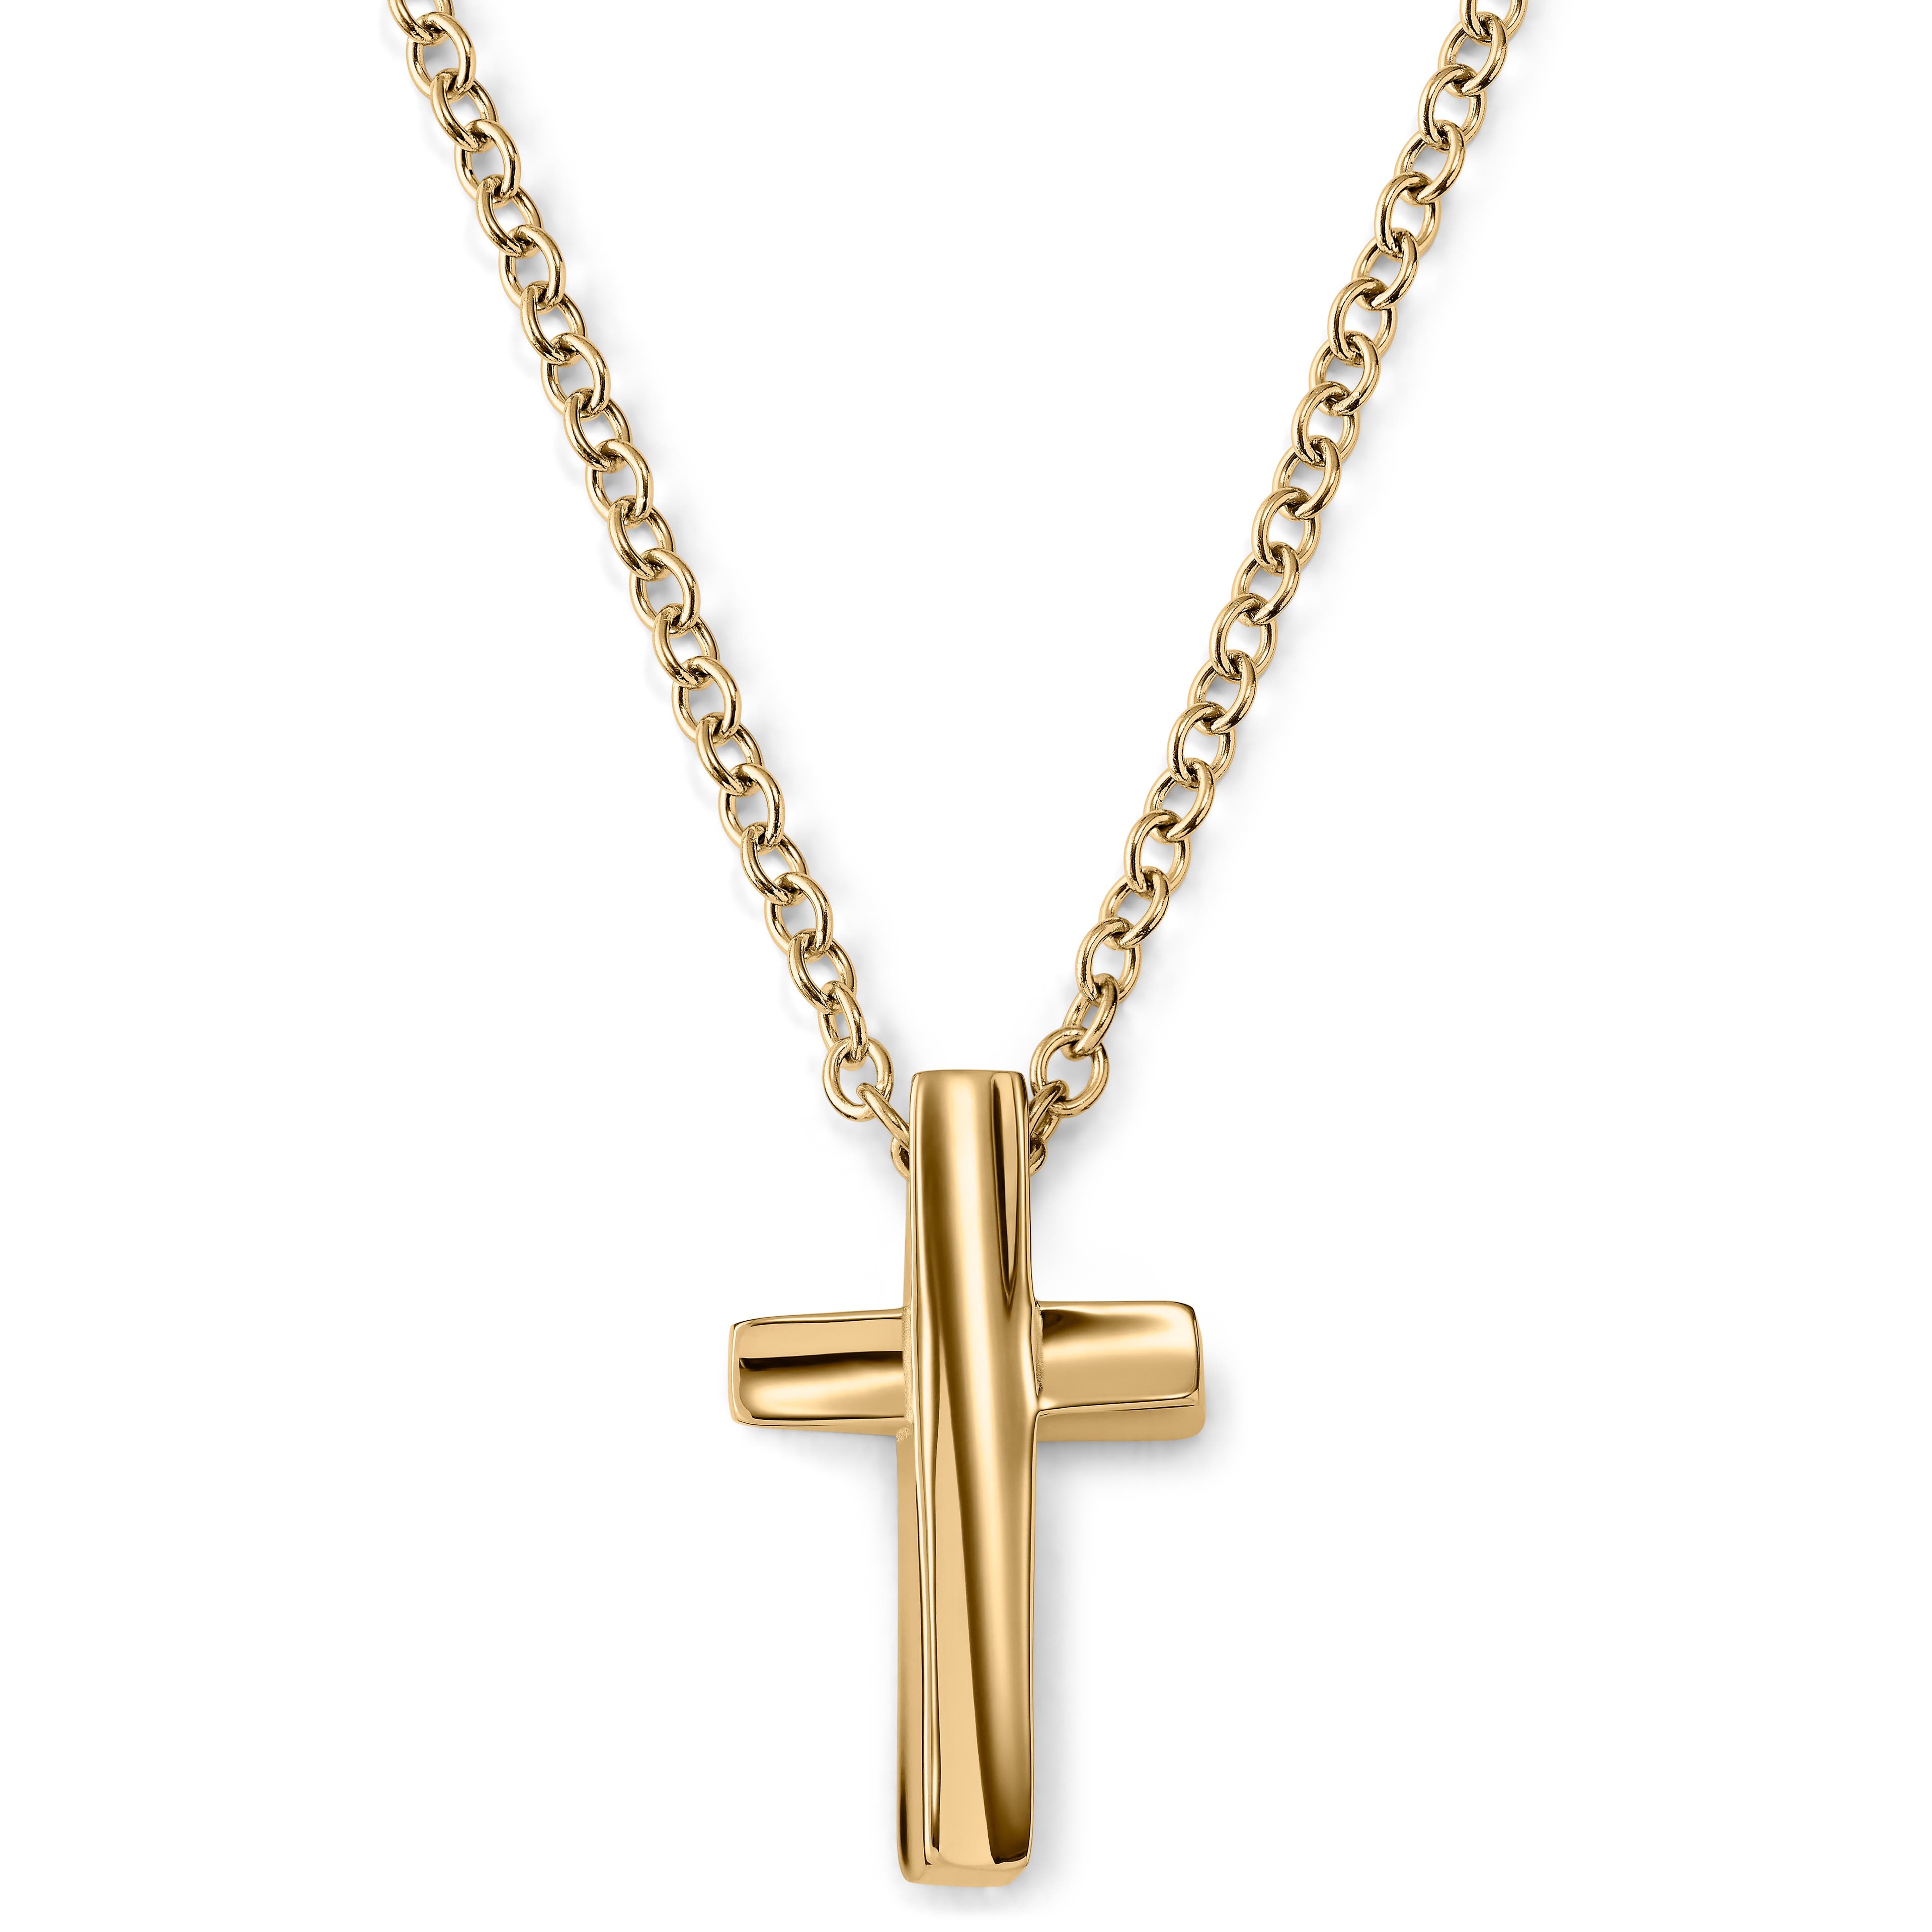 Gold-Tone With Curvy Cross Cable Chain Necklace